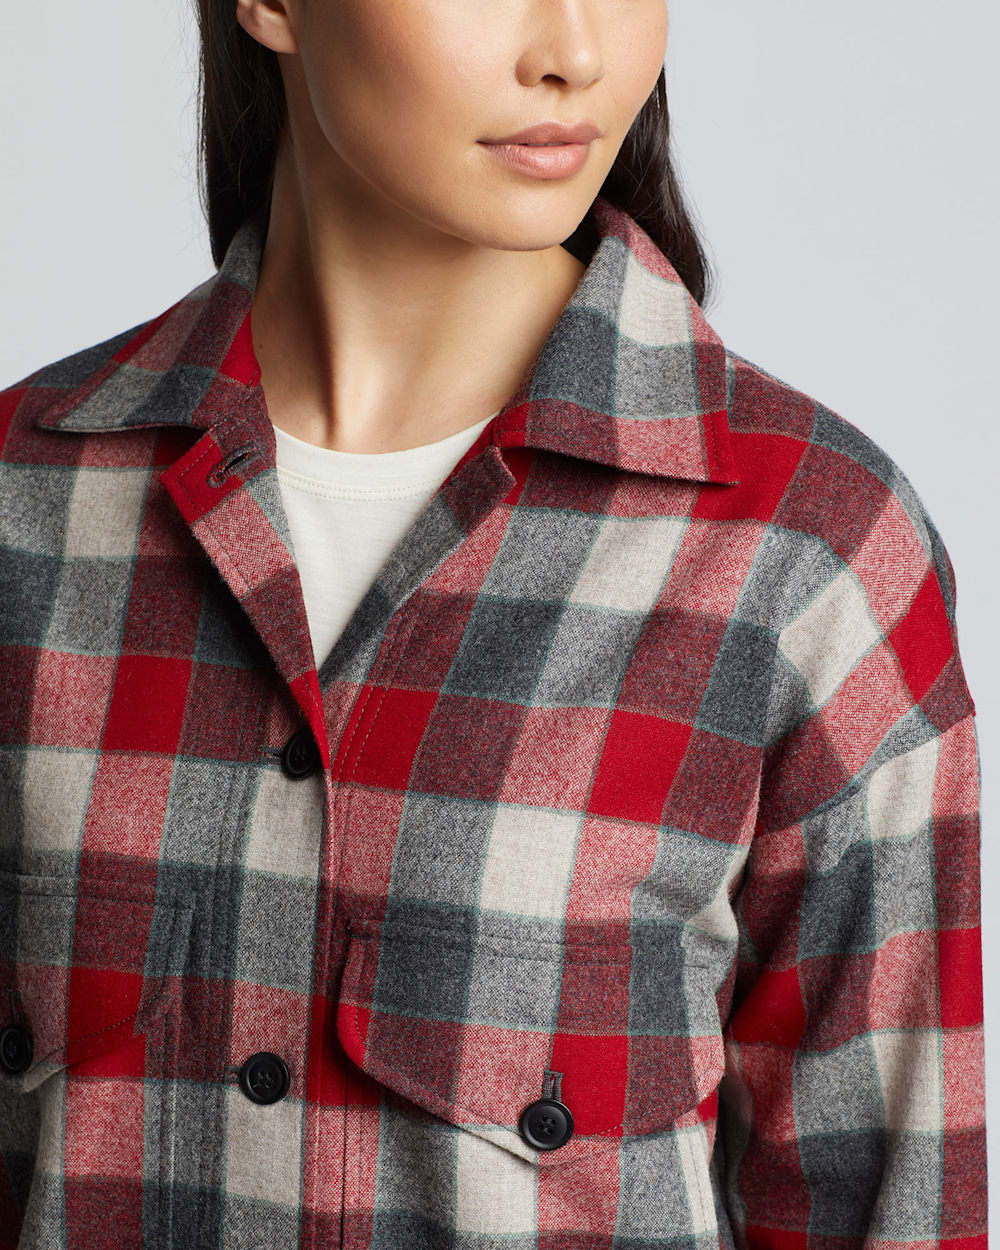 ALTERNATE VIEW OF WOMEN'S OVERSIZED WOOL SHIRT IN RED/TAN BLOCK PLAID image number 4